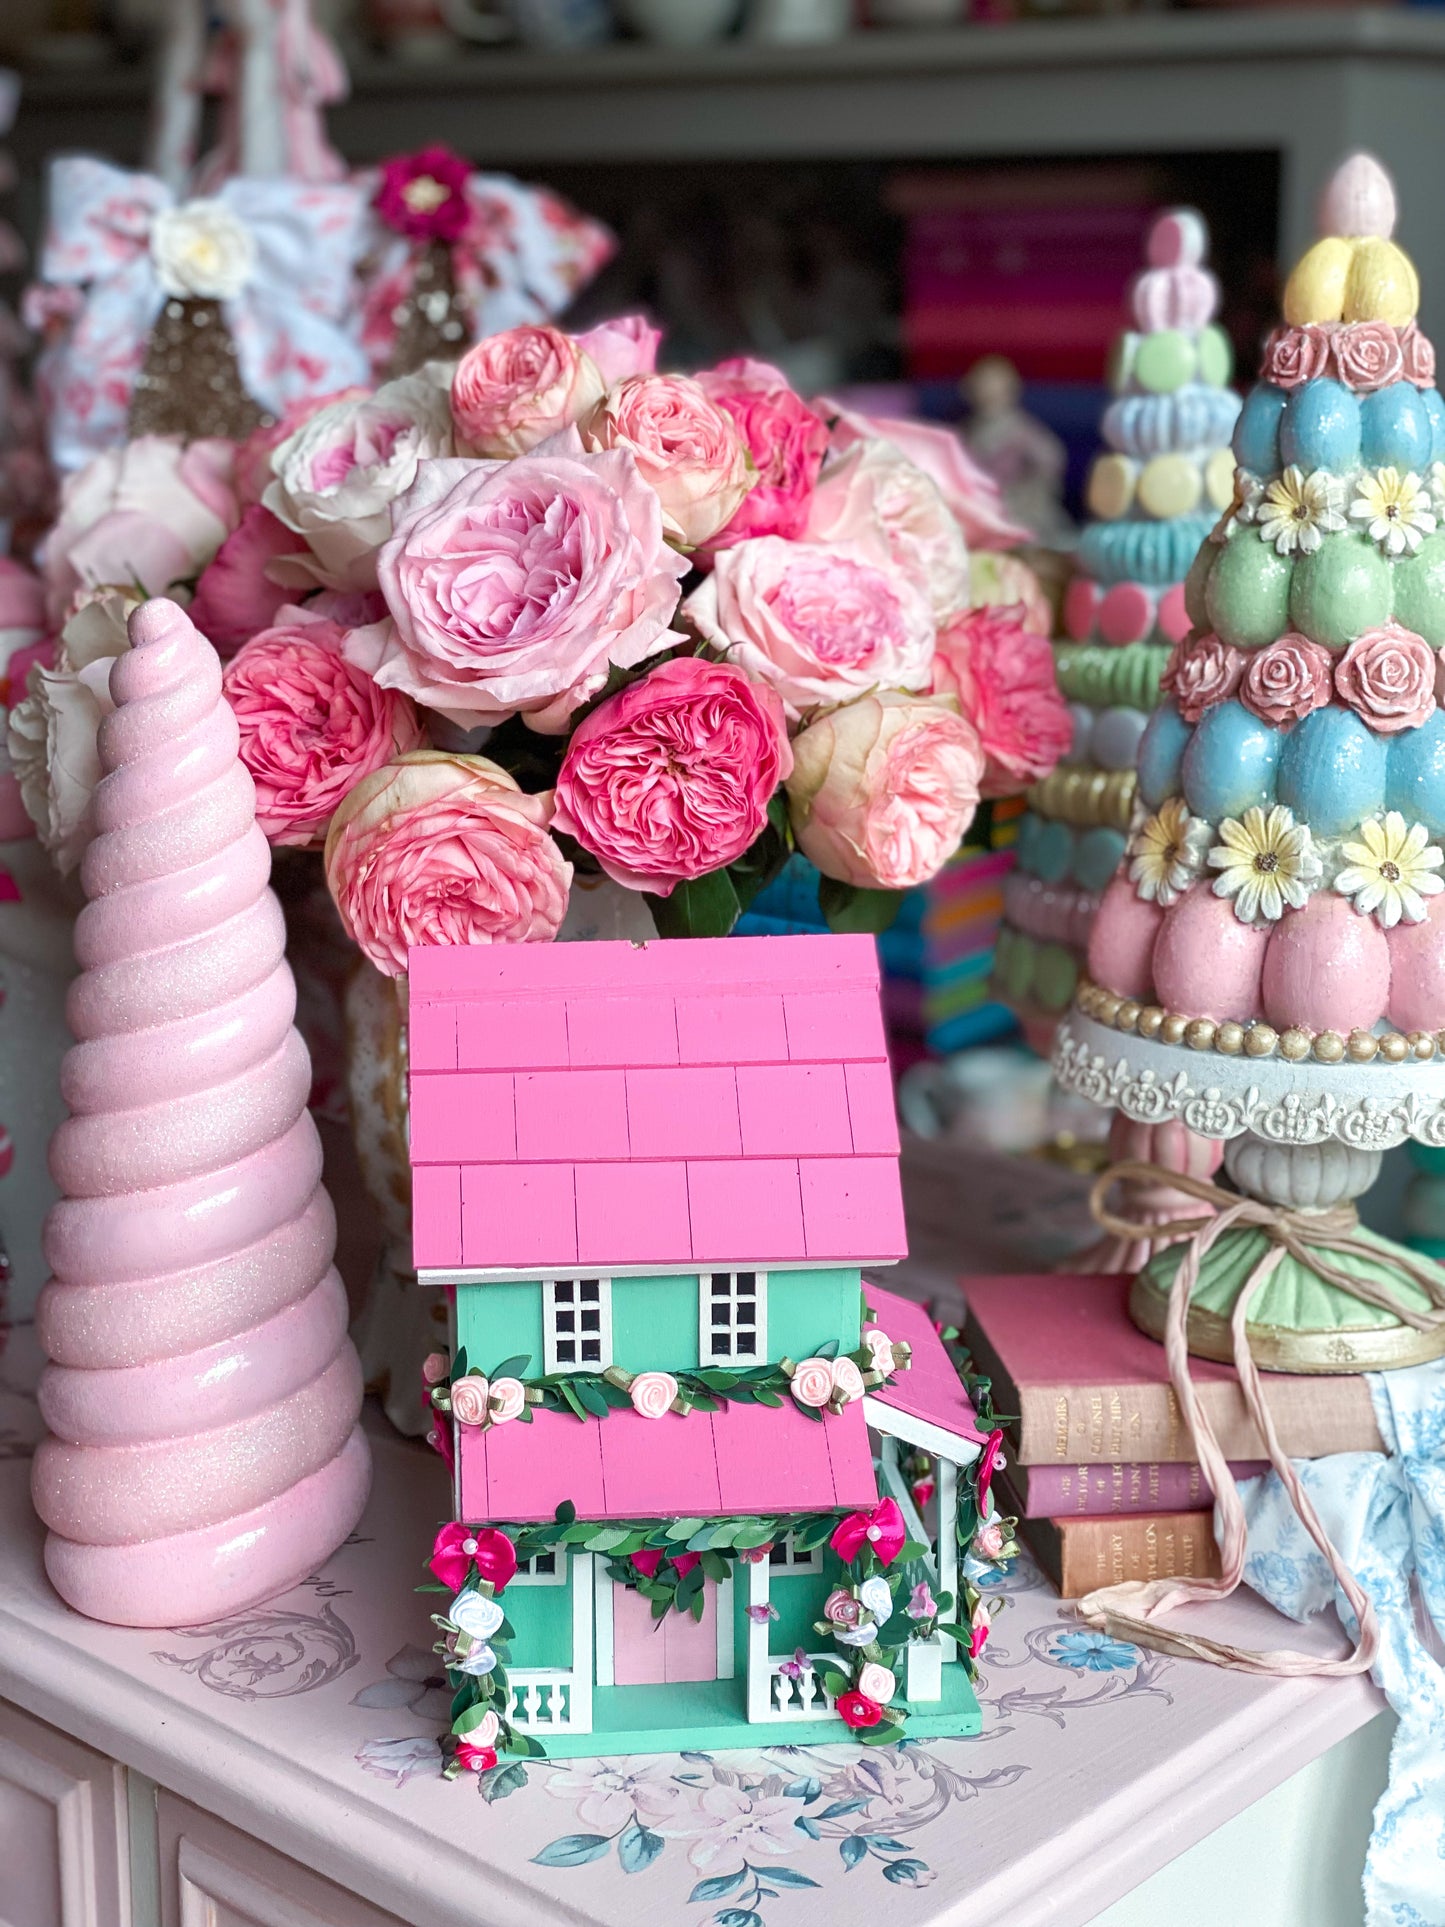 Bespoke Pastel Pink and Green Shabby Chic Floral Spring Easter Village Houses